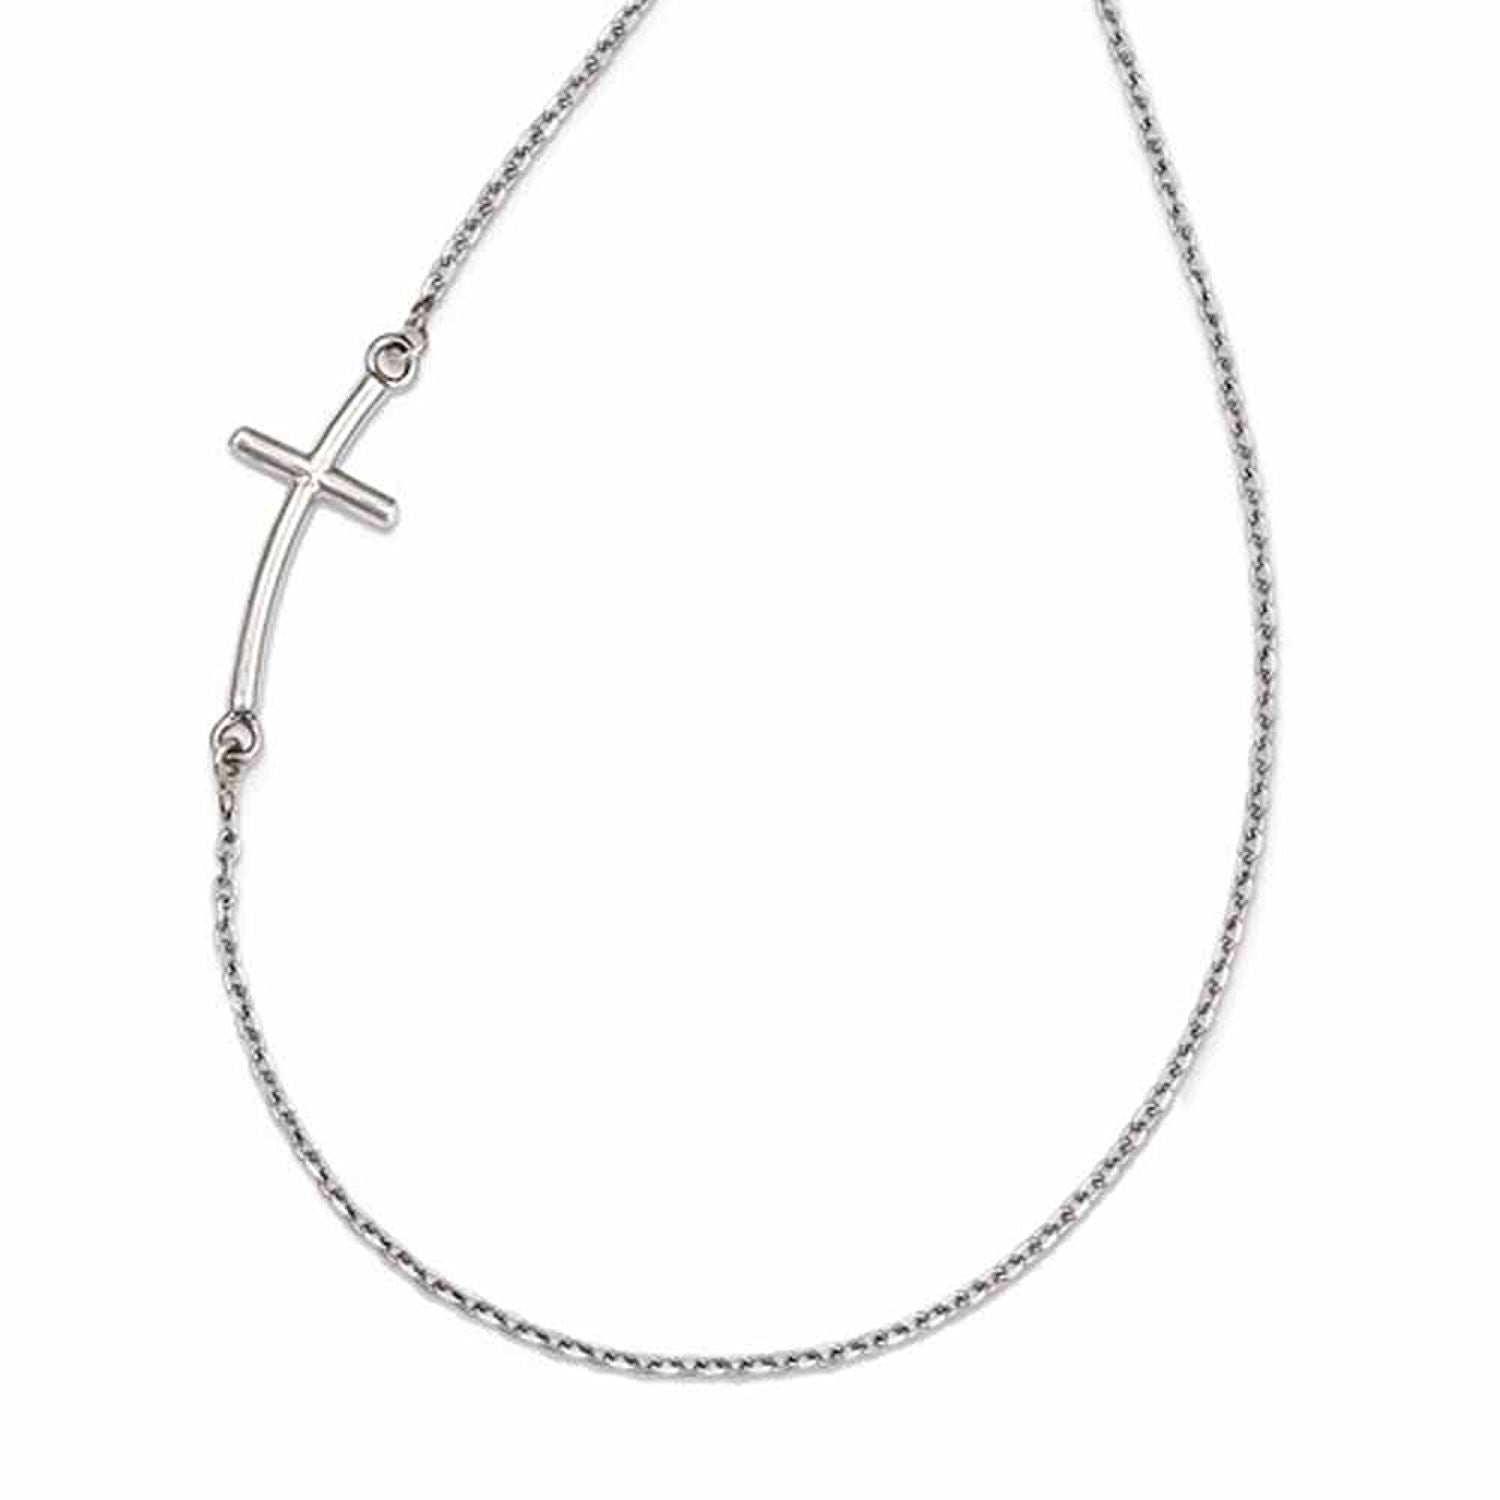 14k White Gold Sideways Curved Cross Necklace 19 Inches